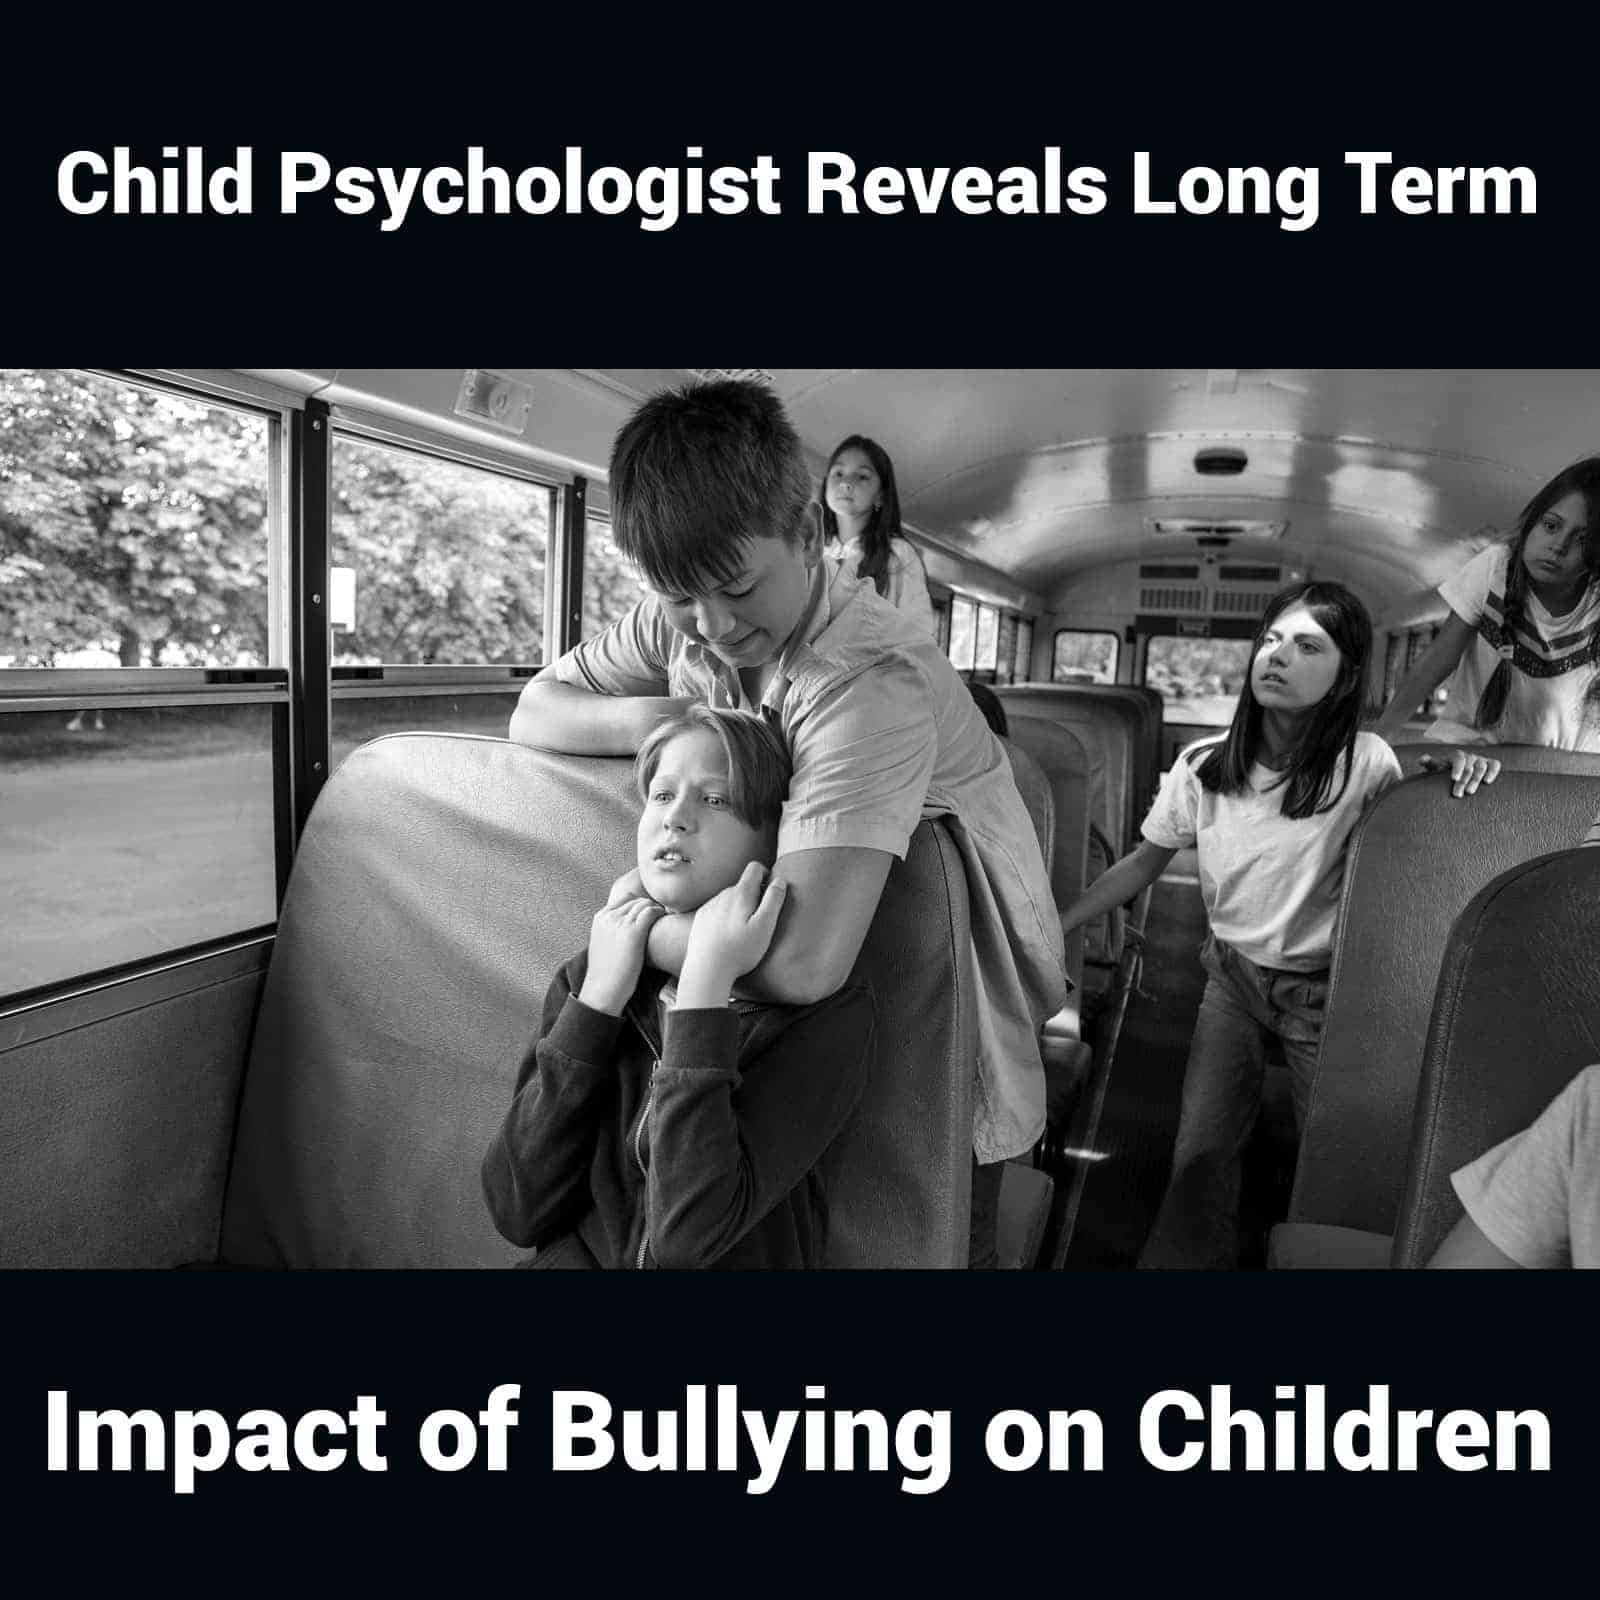 Child Psychologist Reveals Long Term Impact of Bullying on Children